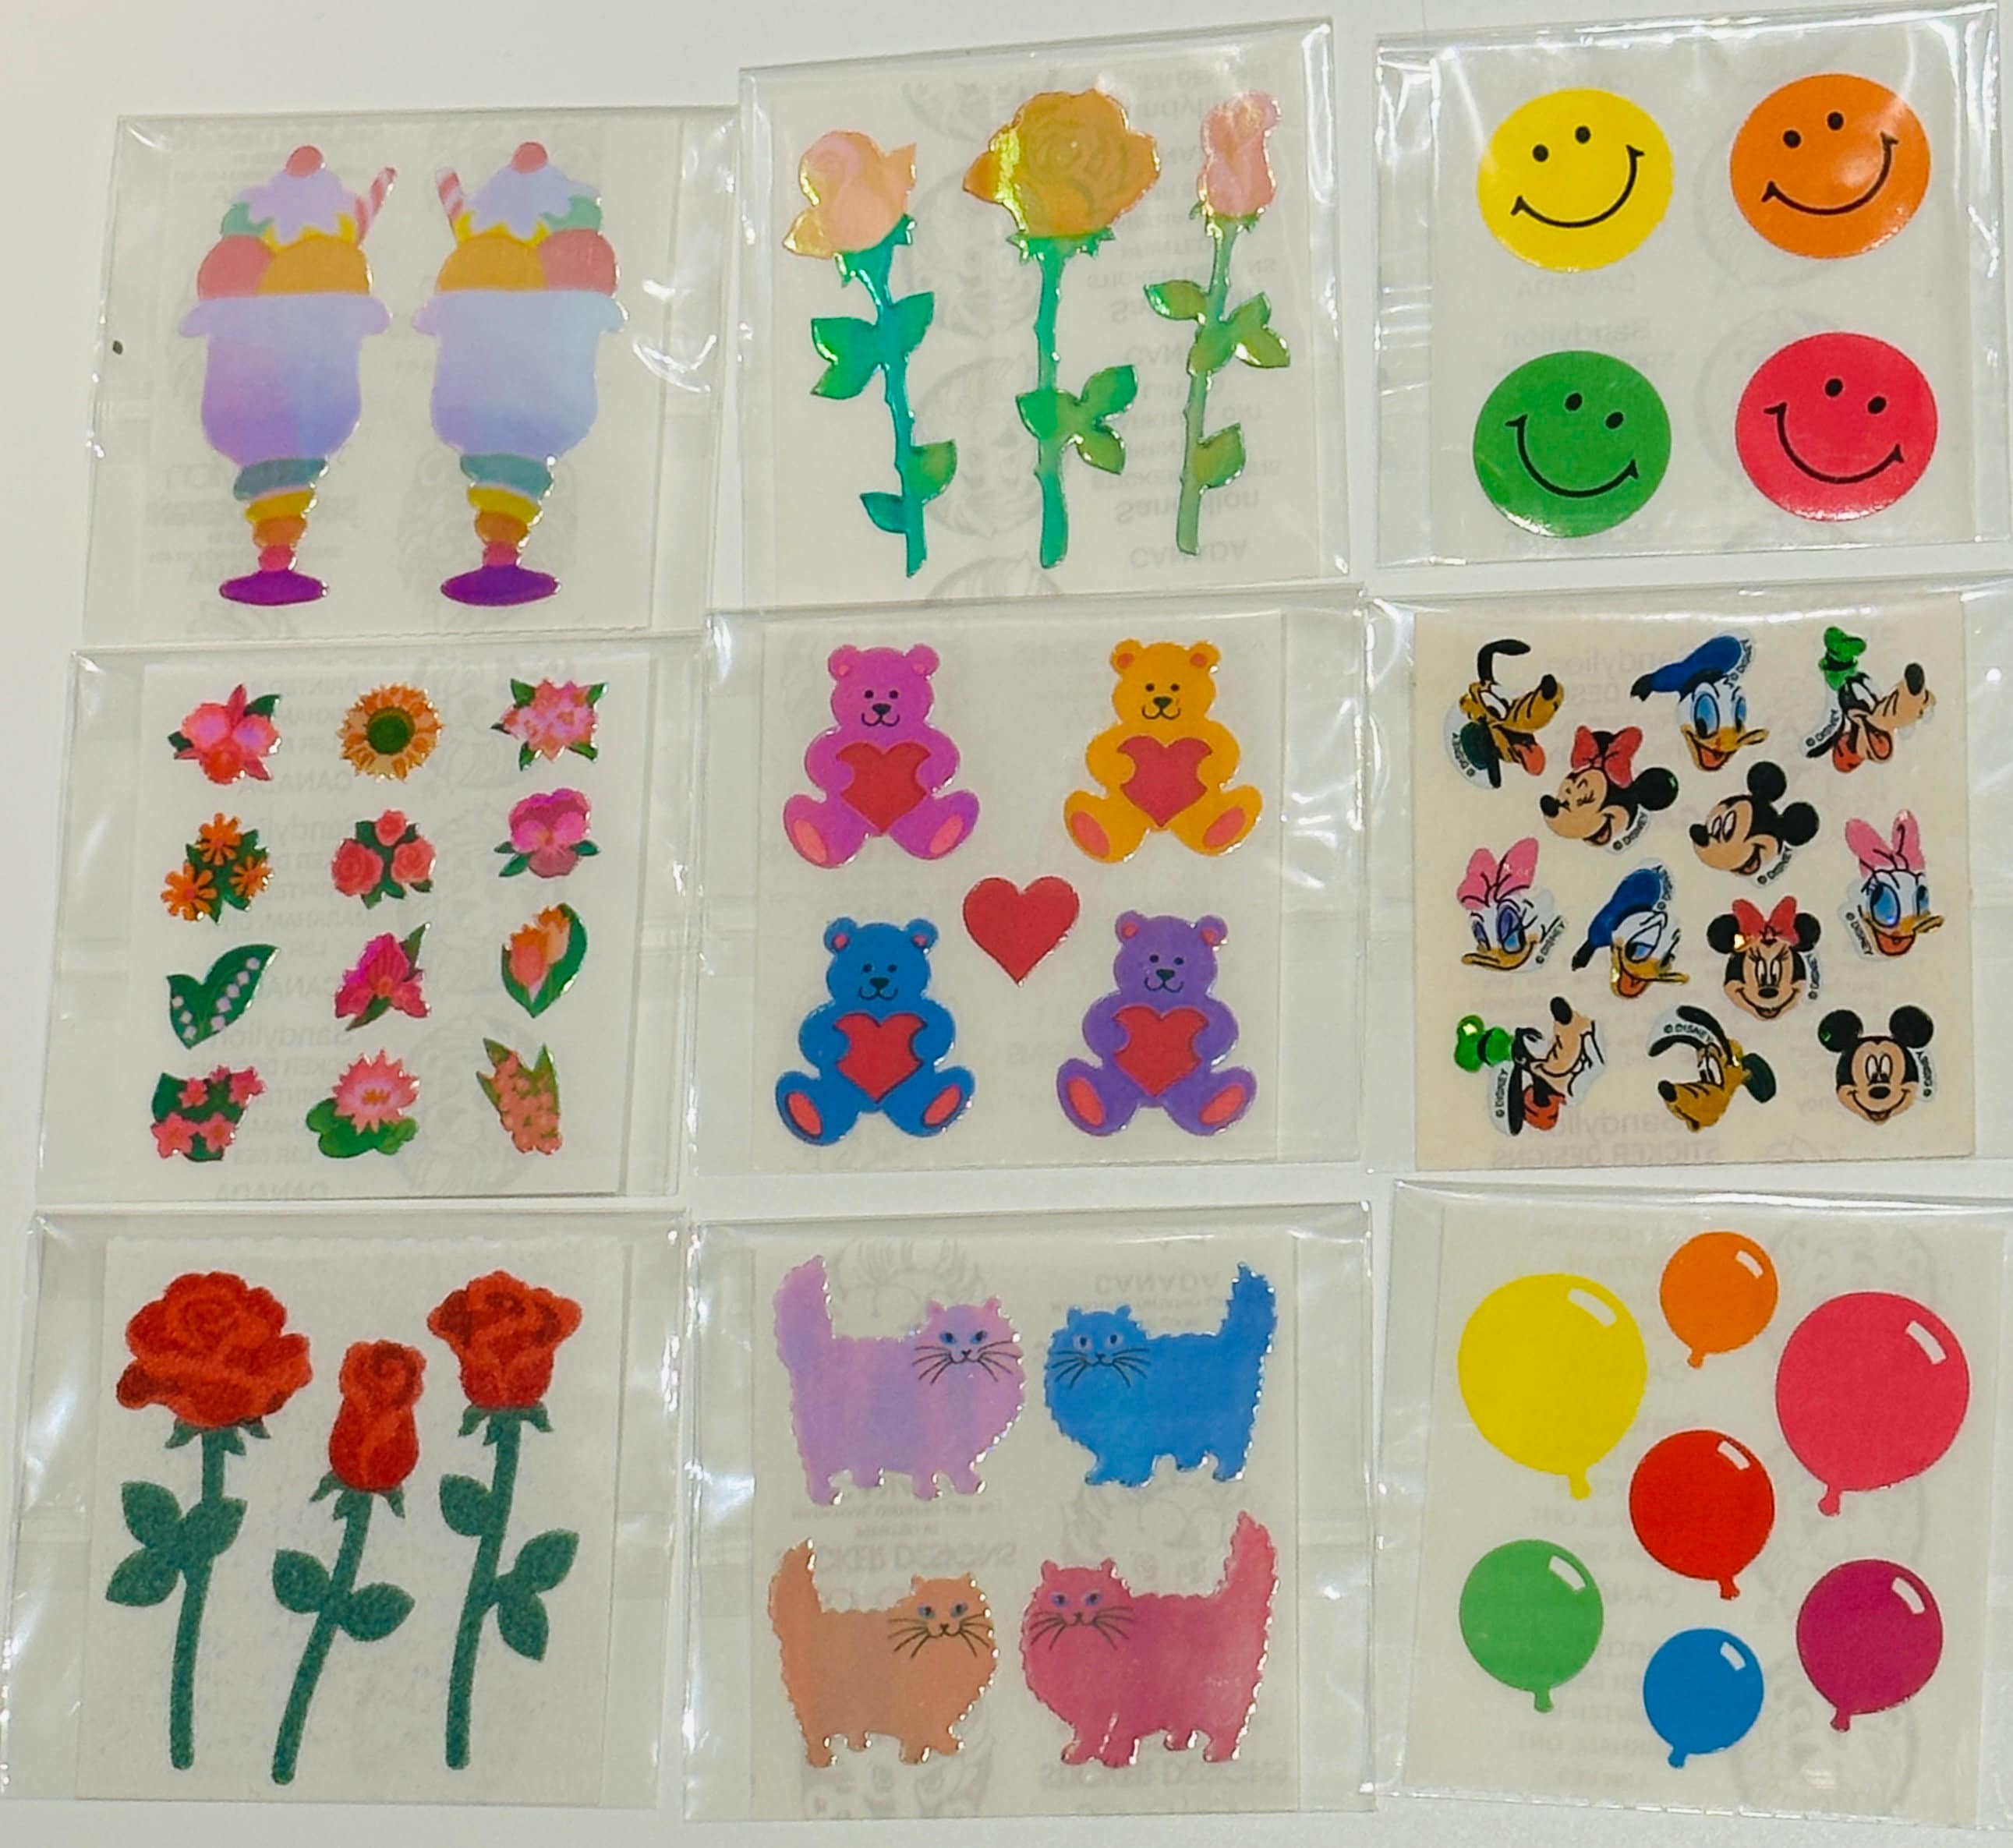 Sticko Stickers Glitter Stickers Sparkly Stickers Smiley Face Bubbles  Balloons Party Stickers Heart Stickers Toploader Deco 